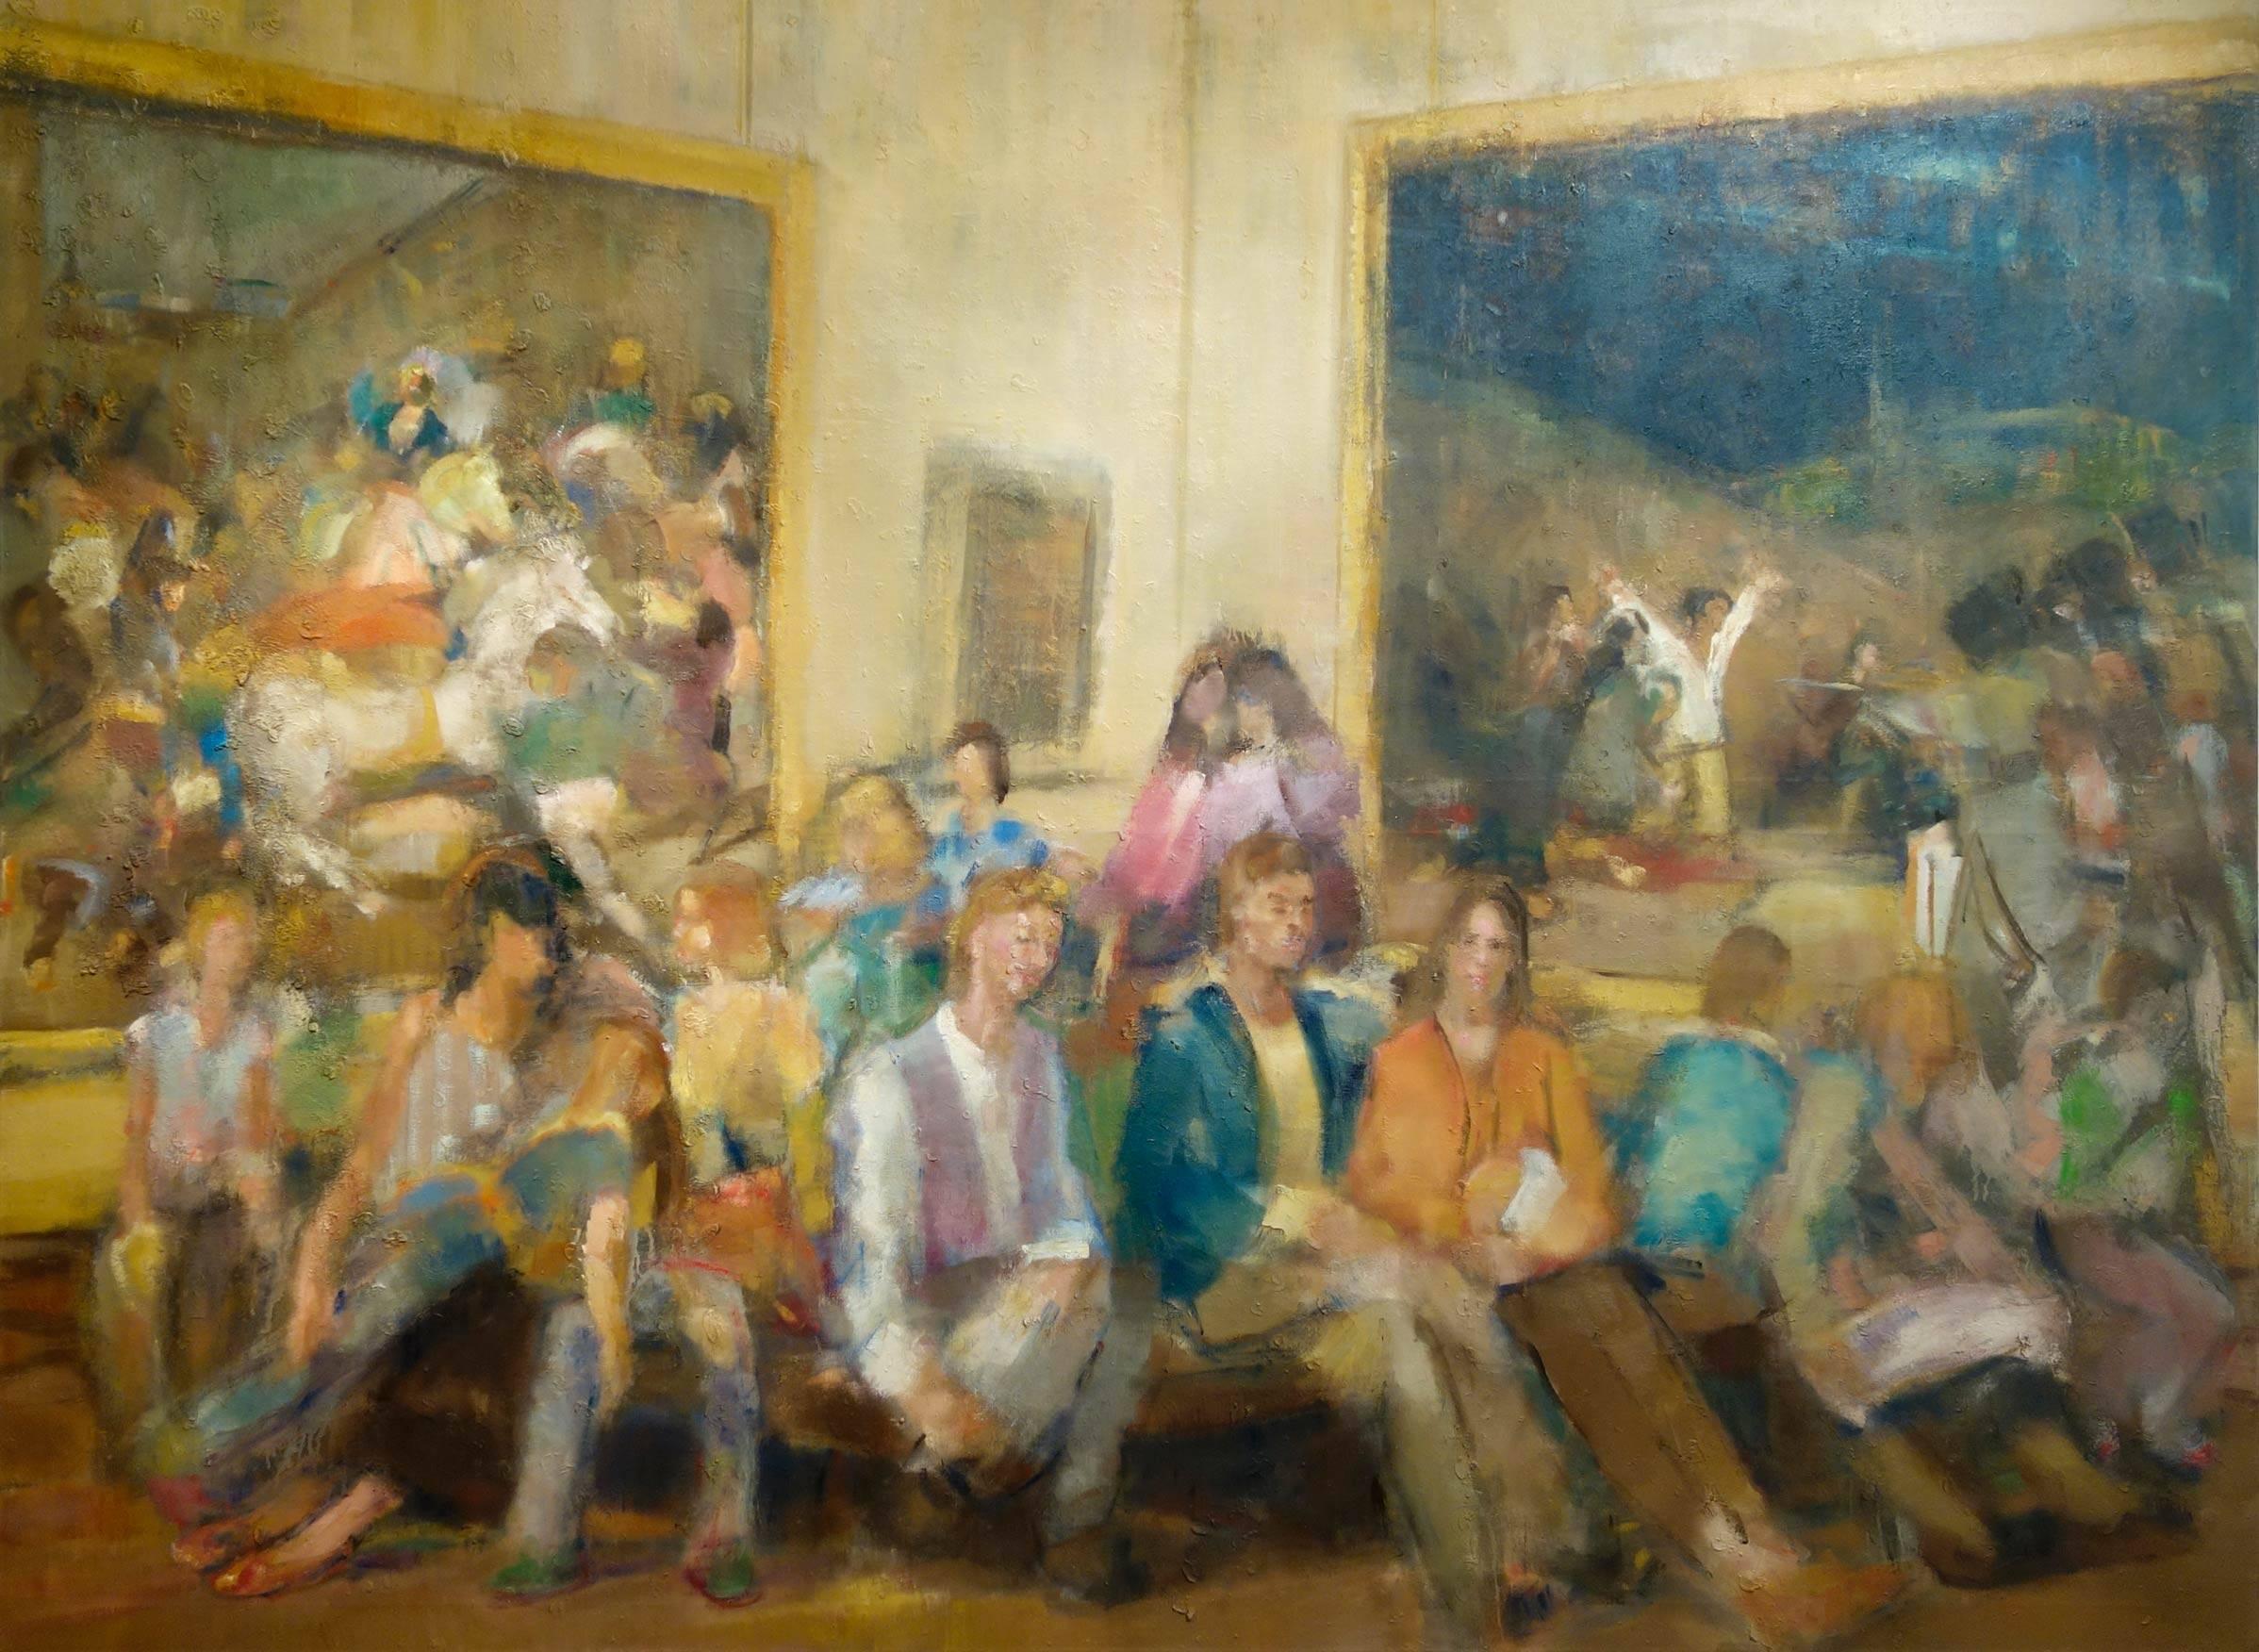 2ND AND 3RD OF MAY, figurative portrait, people seated in museum, muted colors